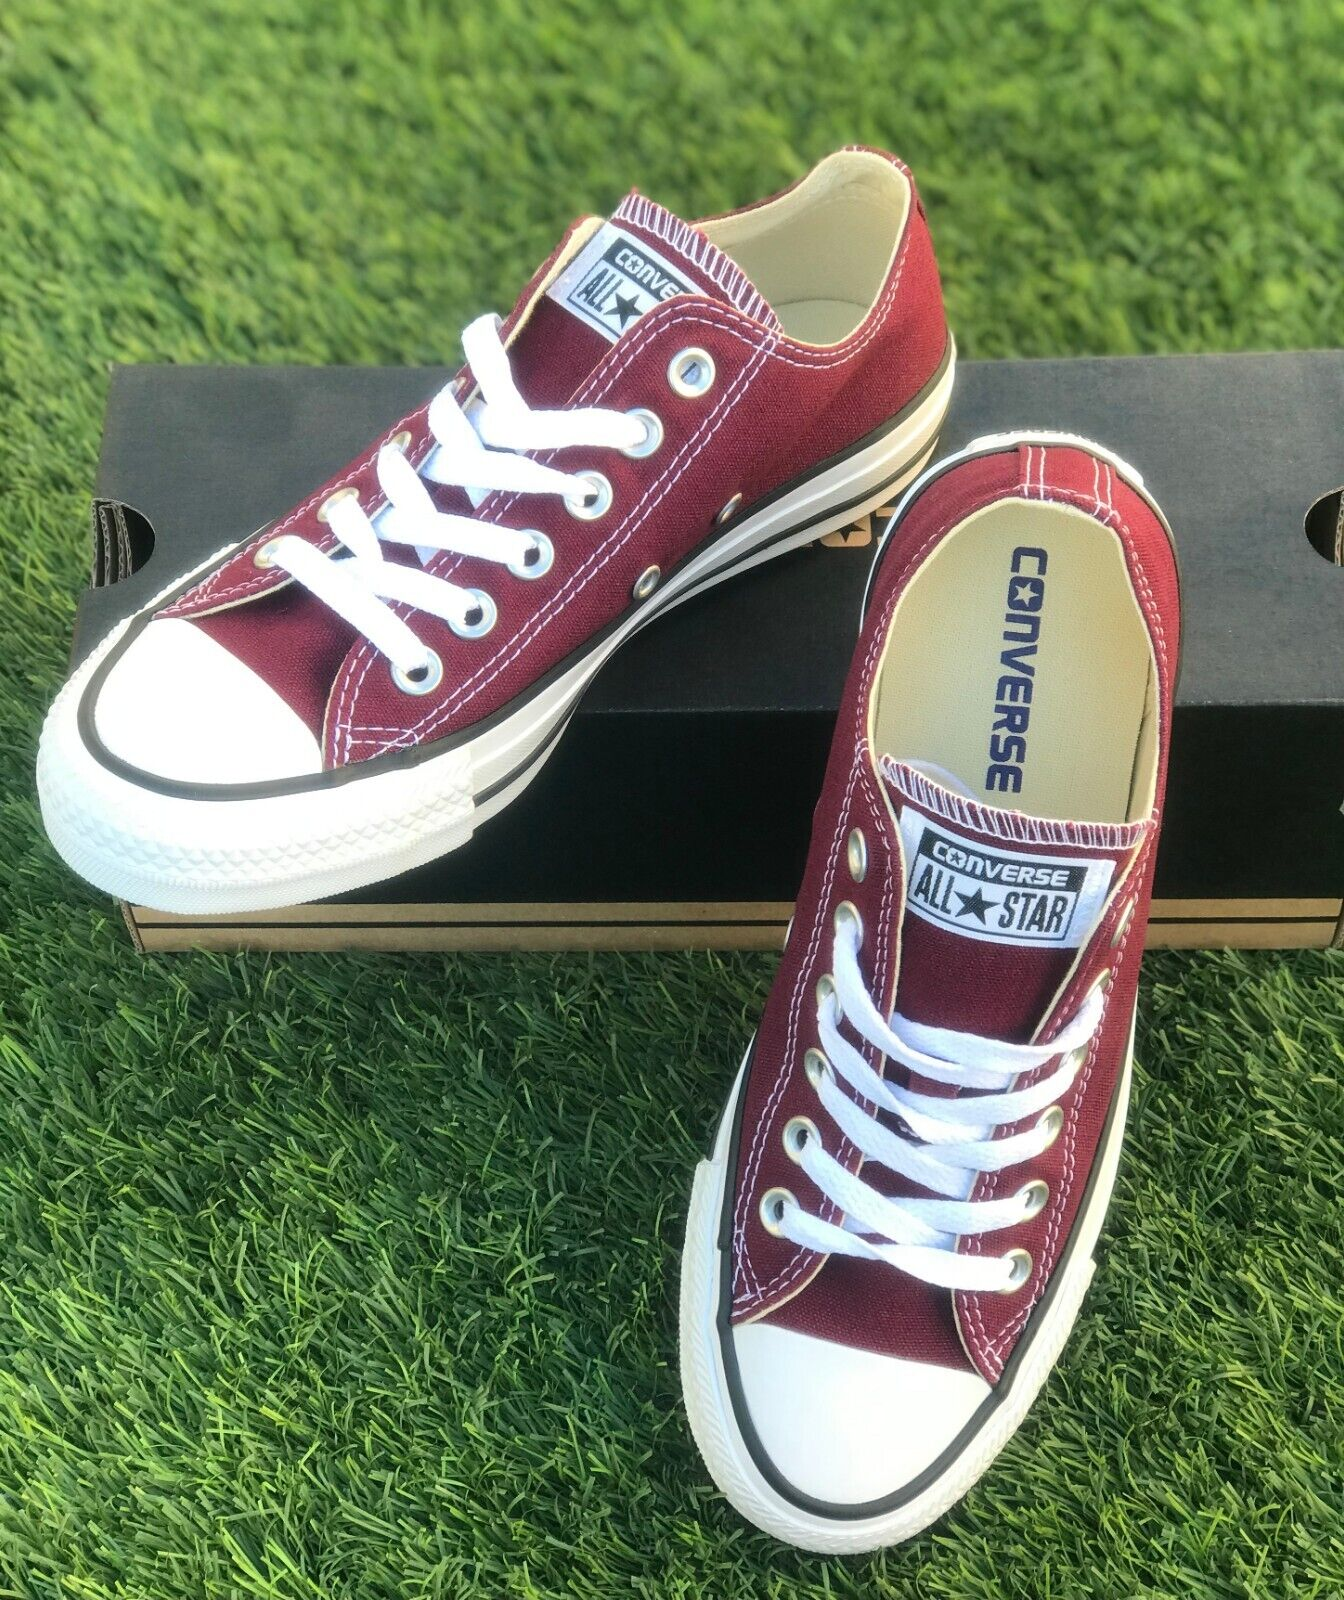 Converse Shoes all Stars for men and women Burgundy Color | eBay